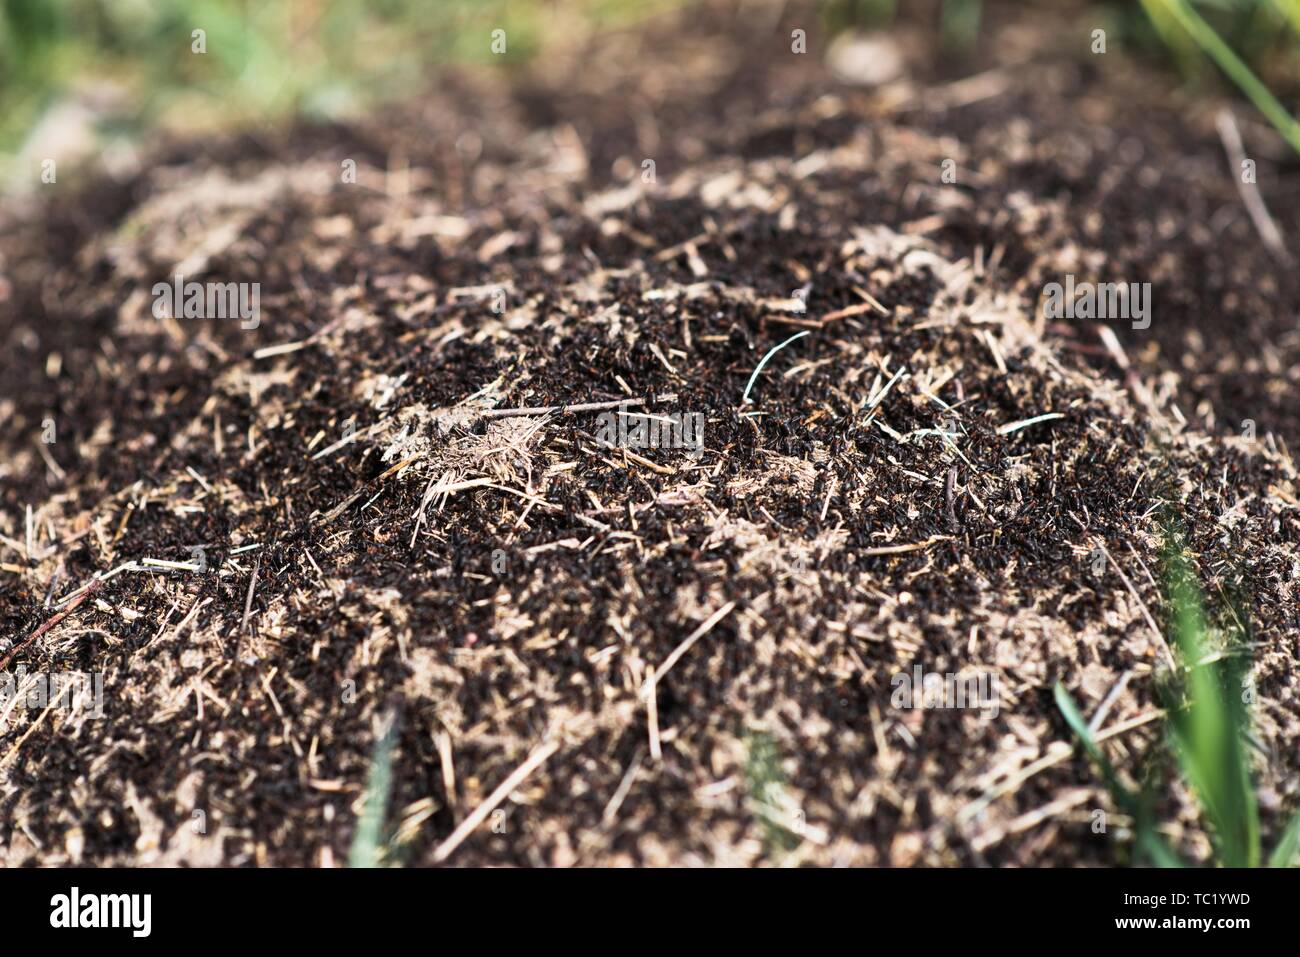 Anthill into the earth among soil and green plants Stock Photo